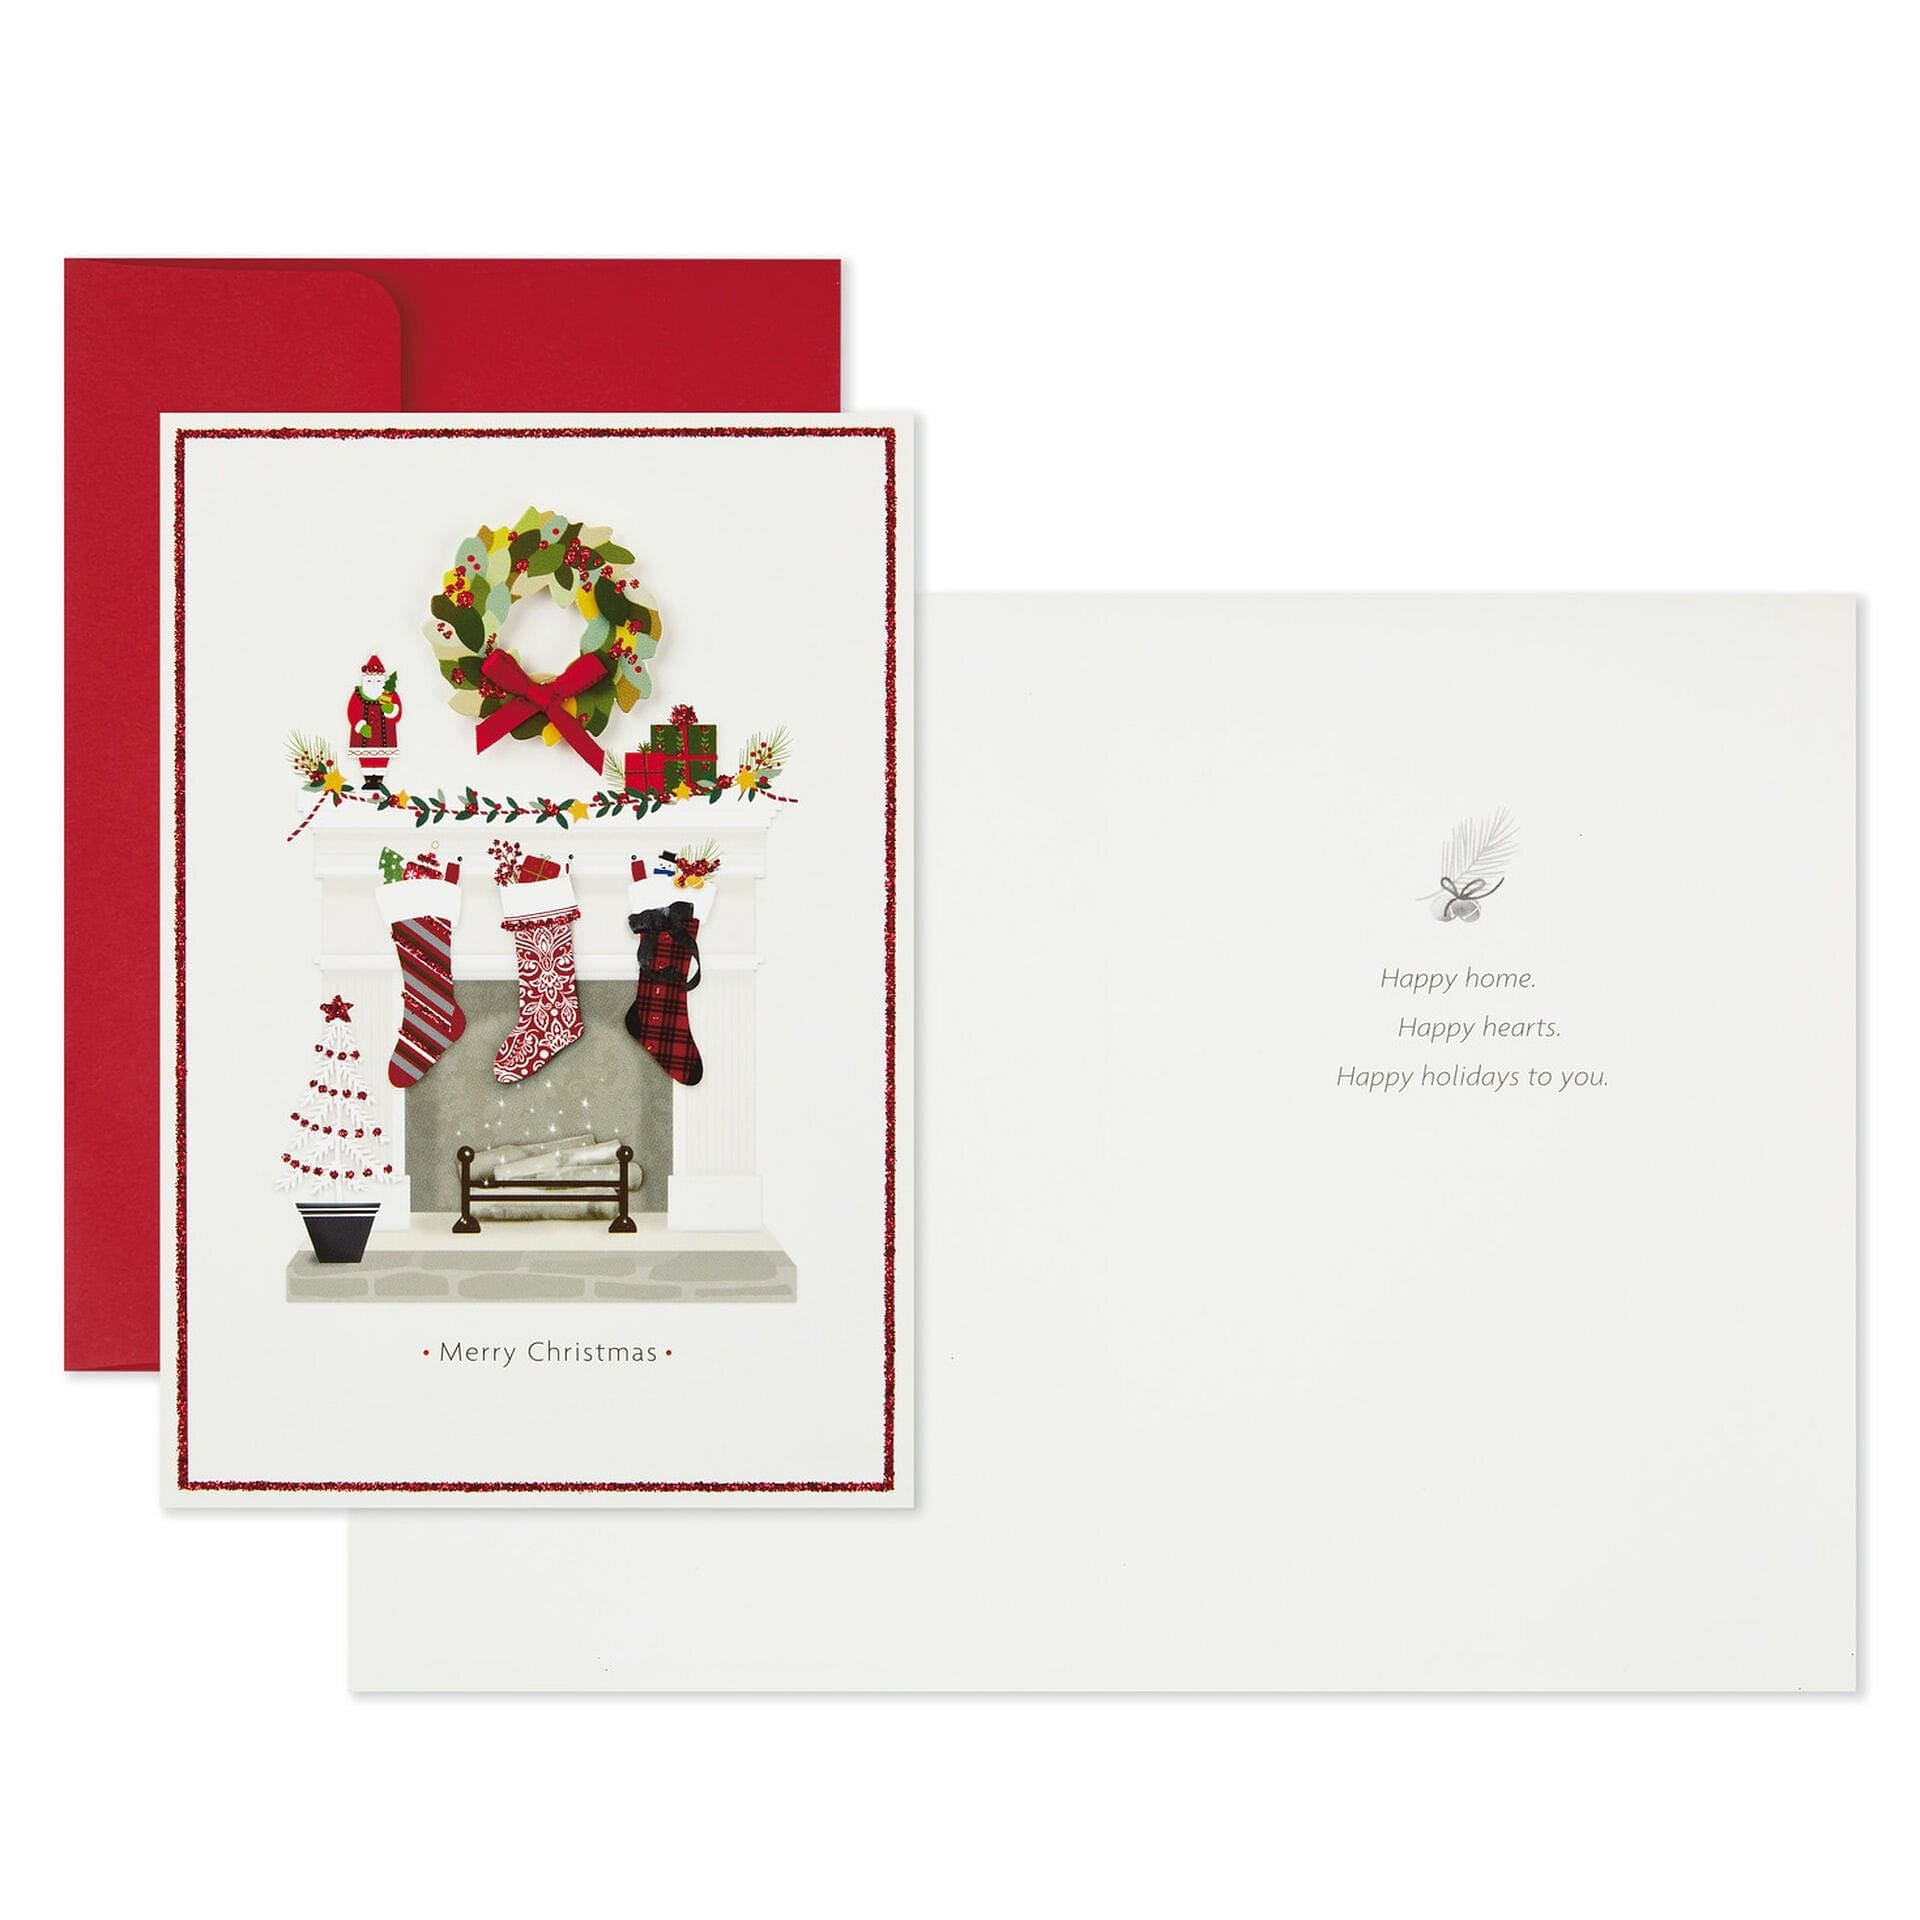 The Stockings Were Hung Boxed Christmas Cards - Pack of 12 - Shelburne Country Store